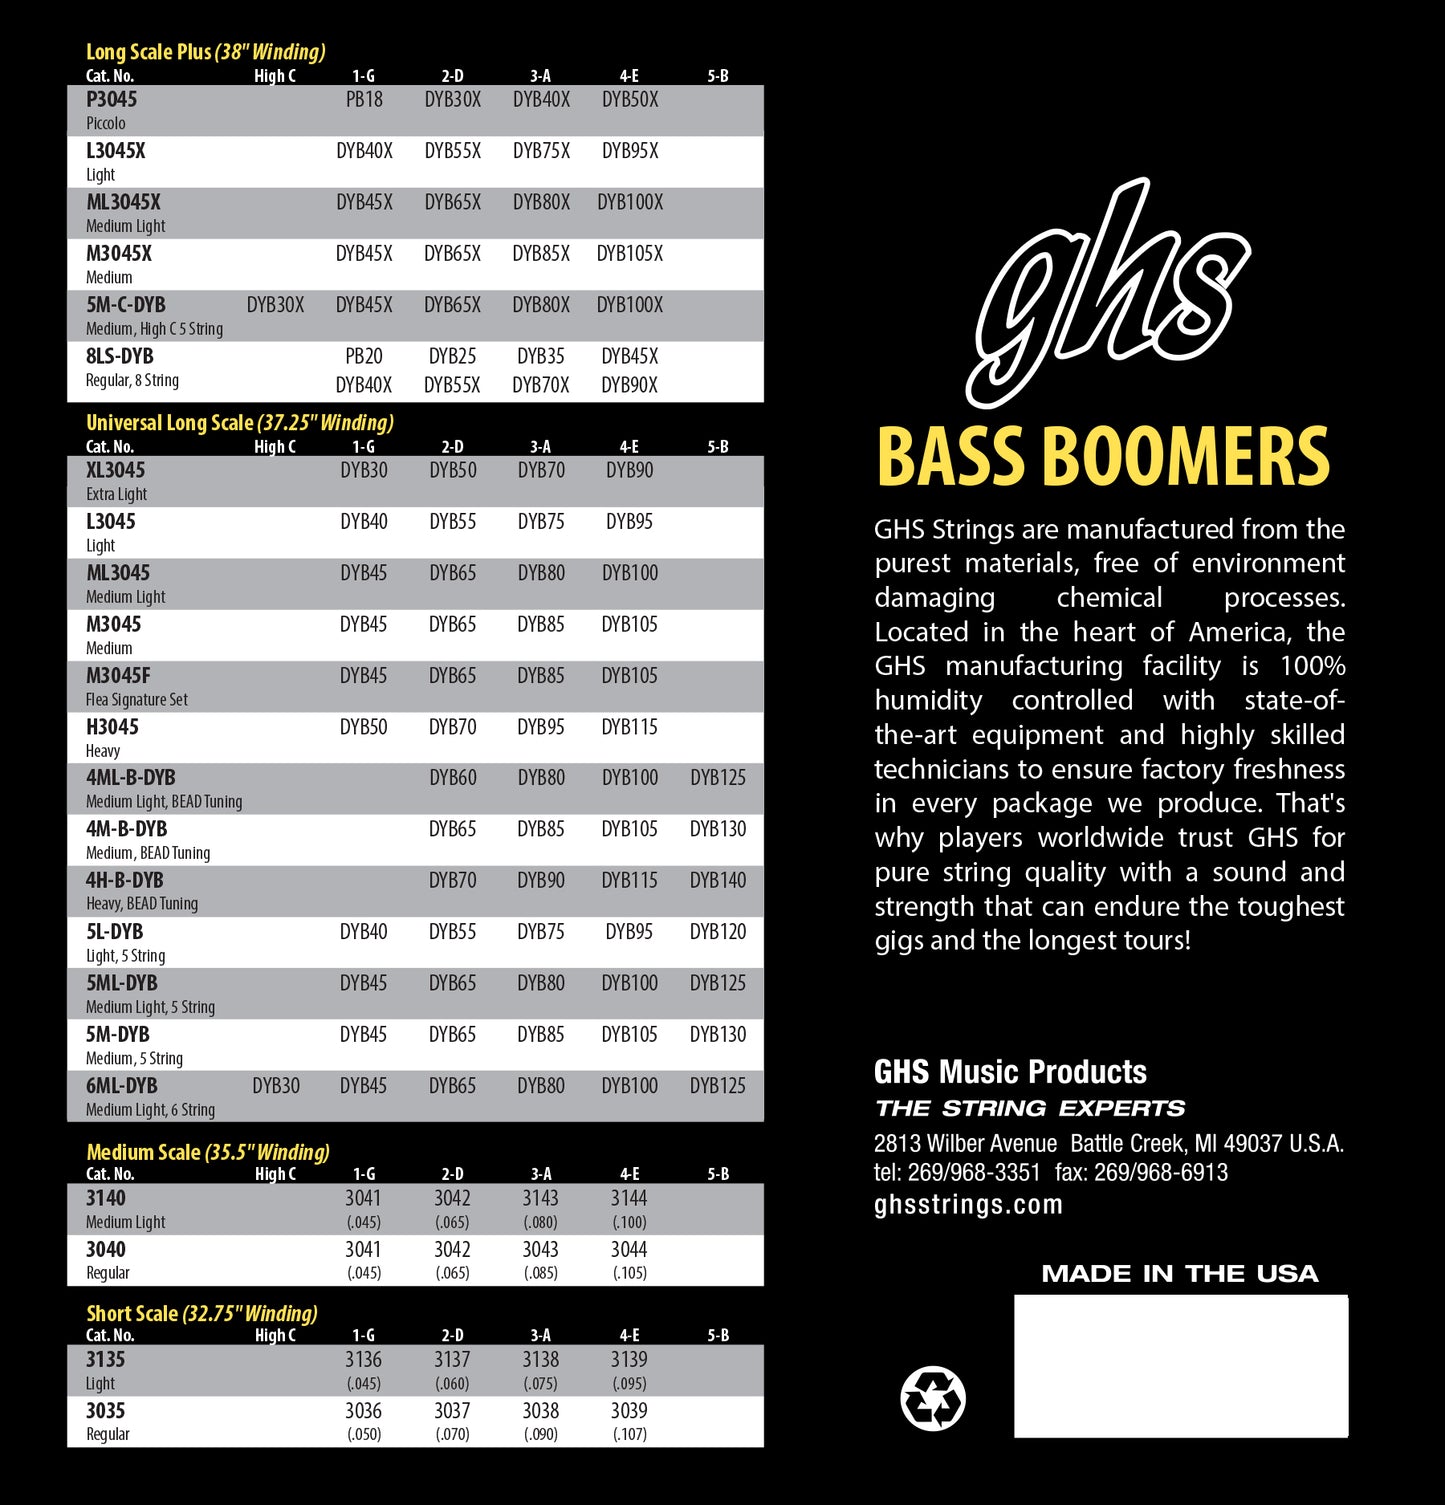 GHS Bass Boomers 5L-DYB, 5-String 40-120